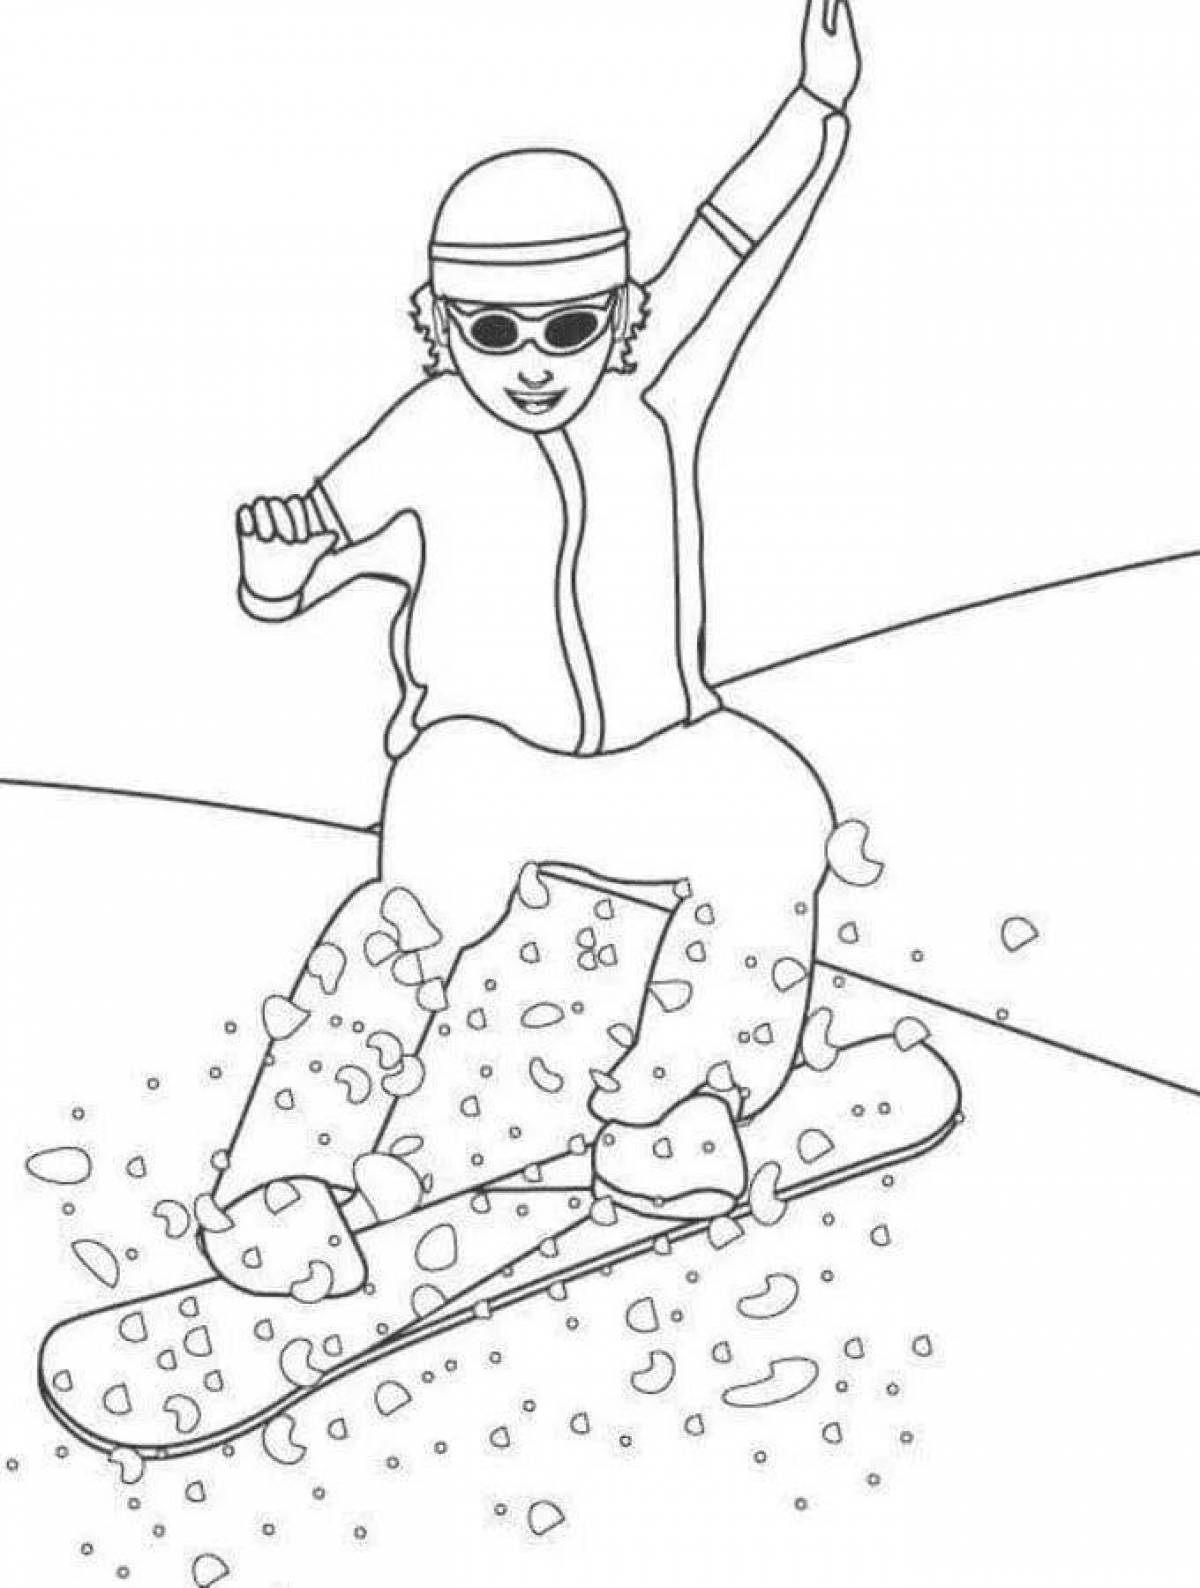 Colourful coloring book for kids winter sports